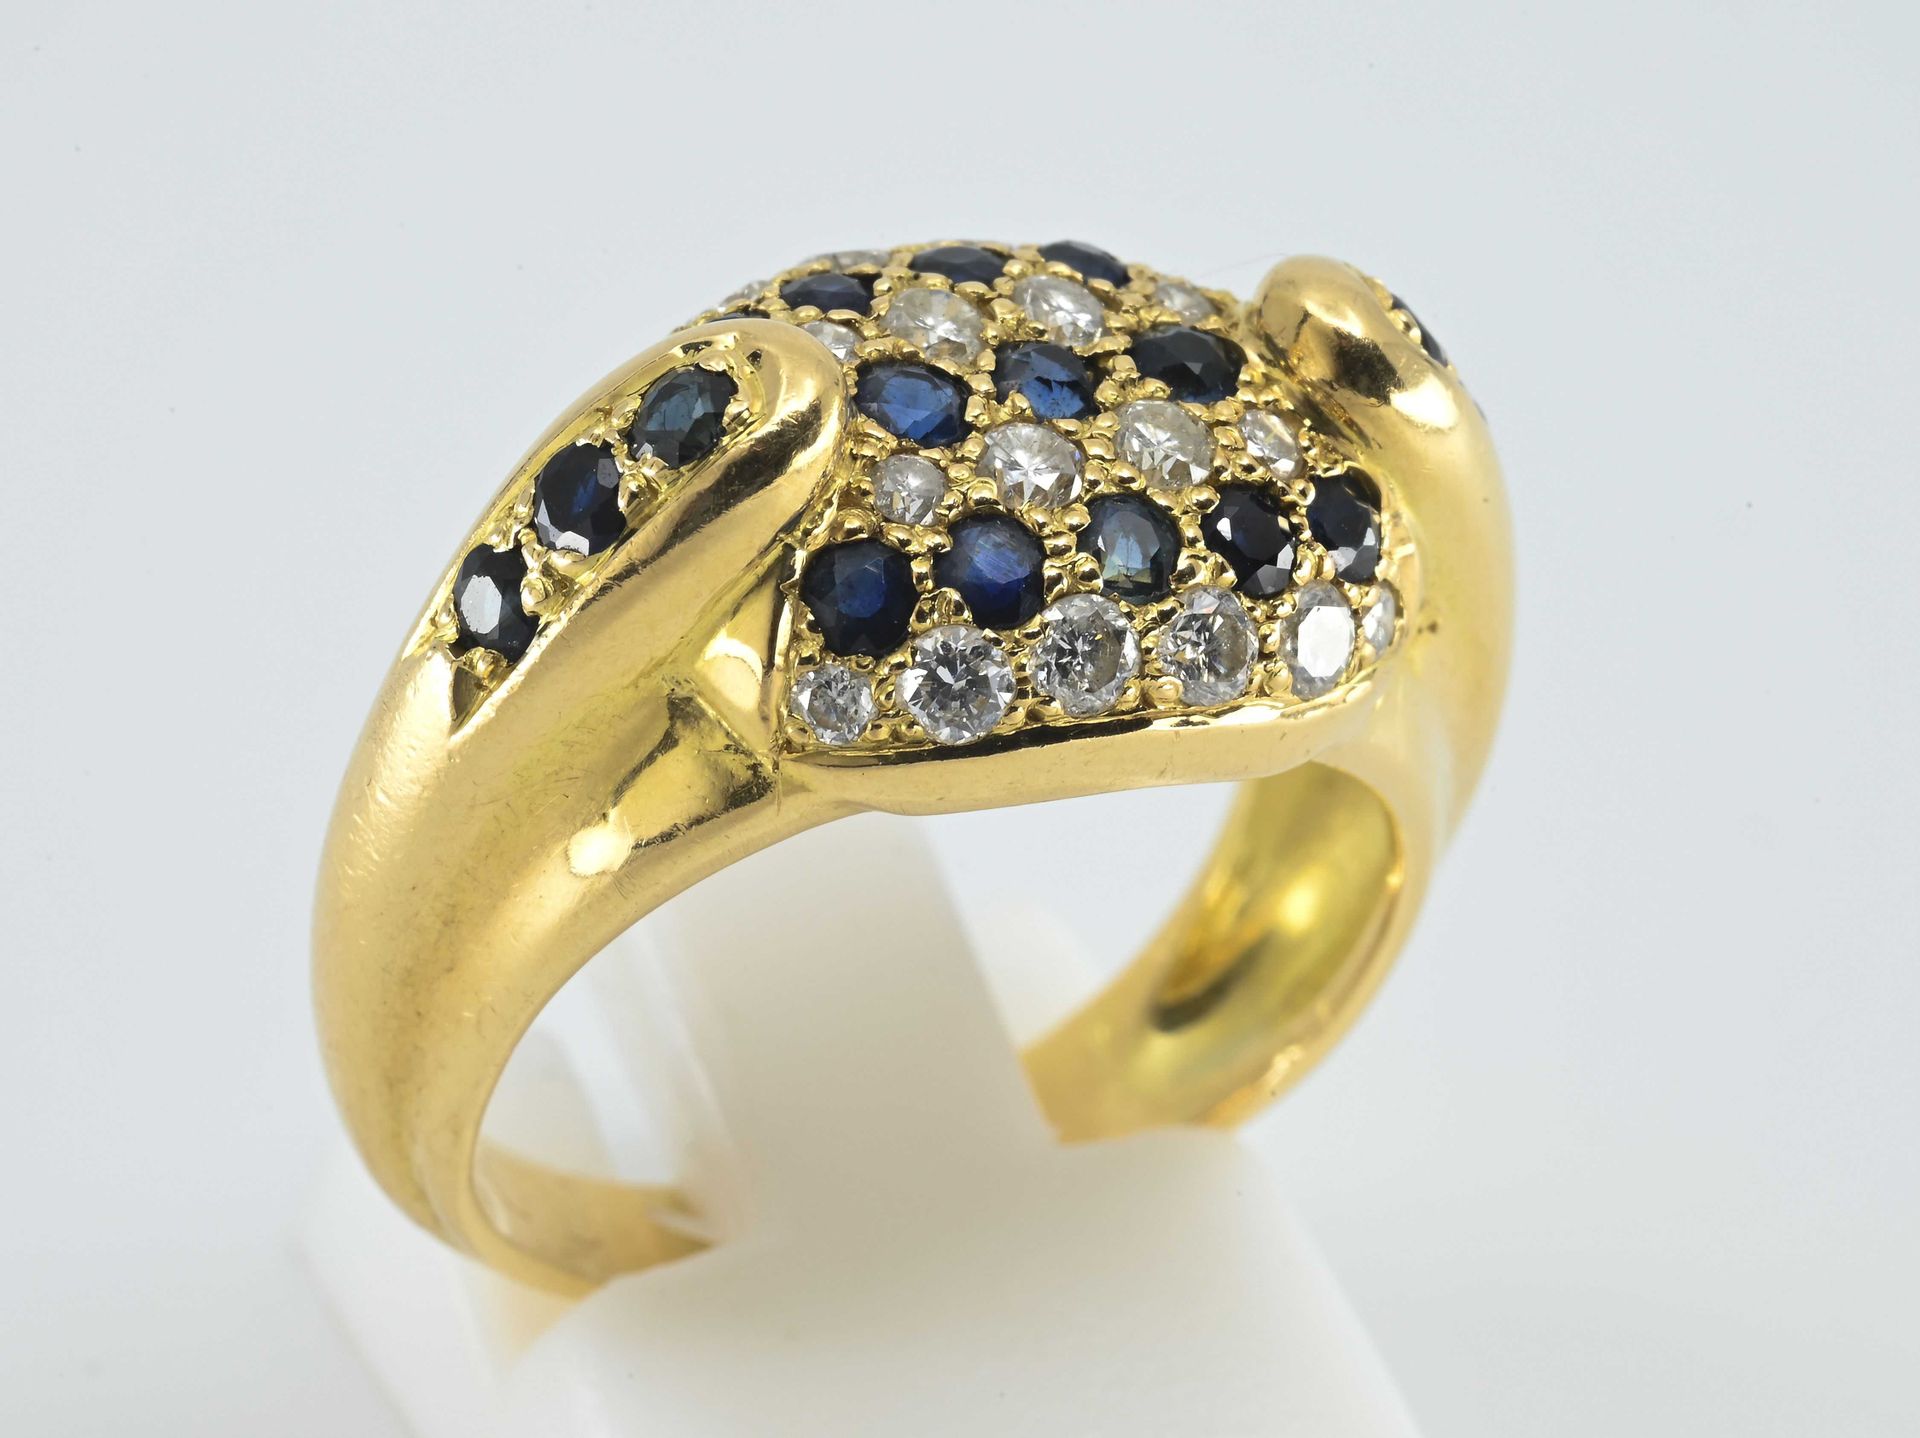 Null Ring in yellow gold 750°°°, with 2 gadroons set with 6 round sapphires
sett&hellip;